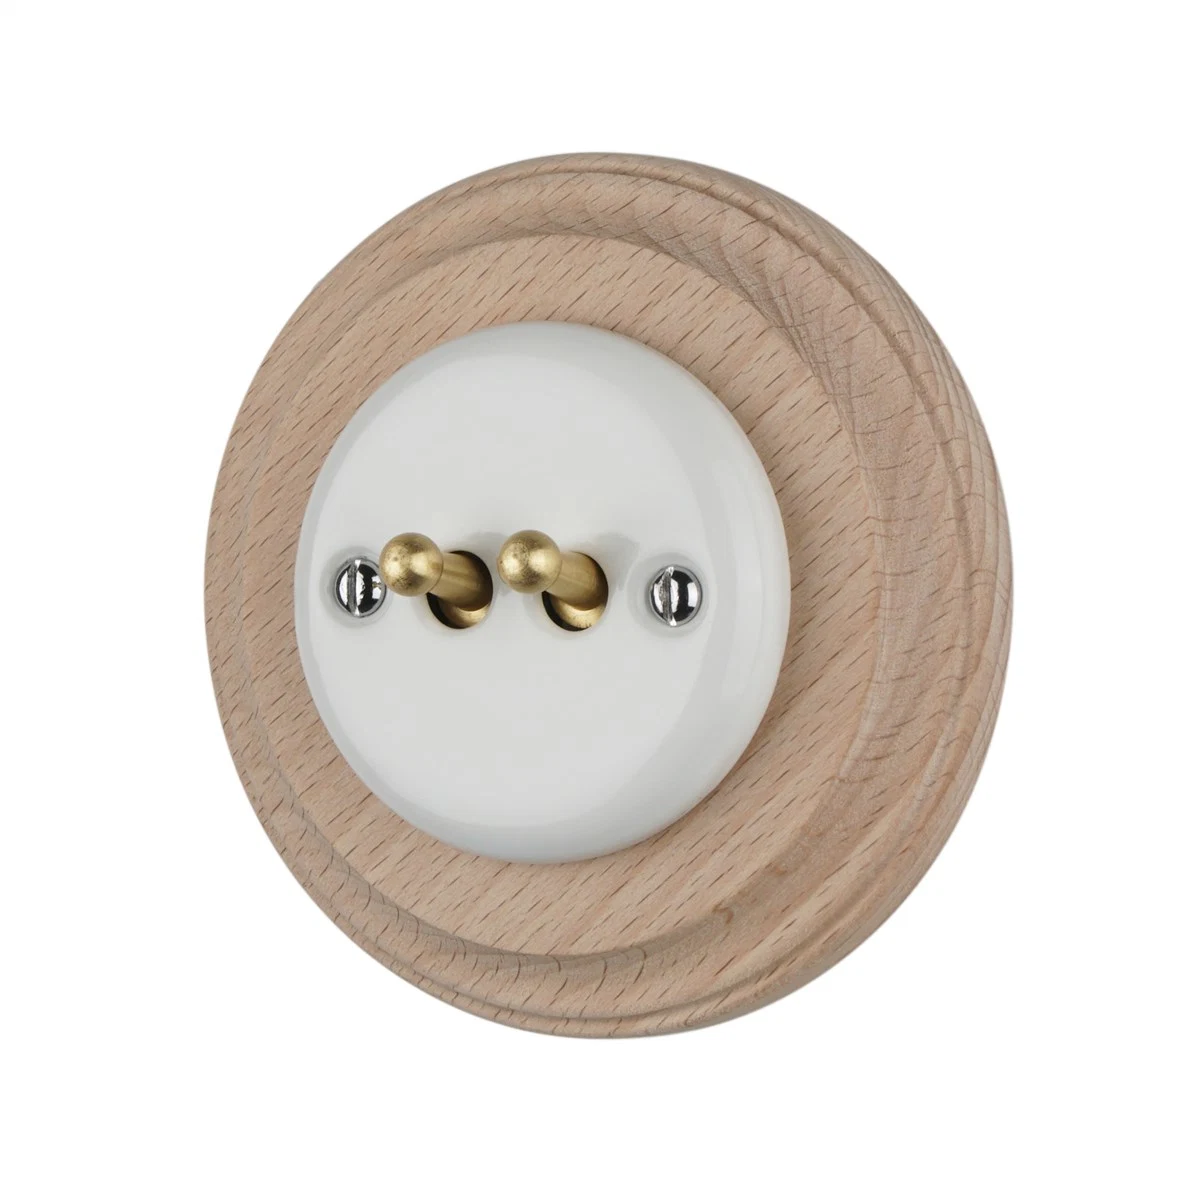 Retro Style Porcelain Wall Switch Socket, Toggle Switch for Germany, Spain